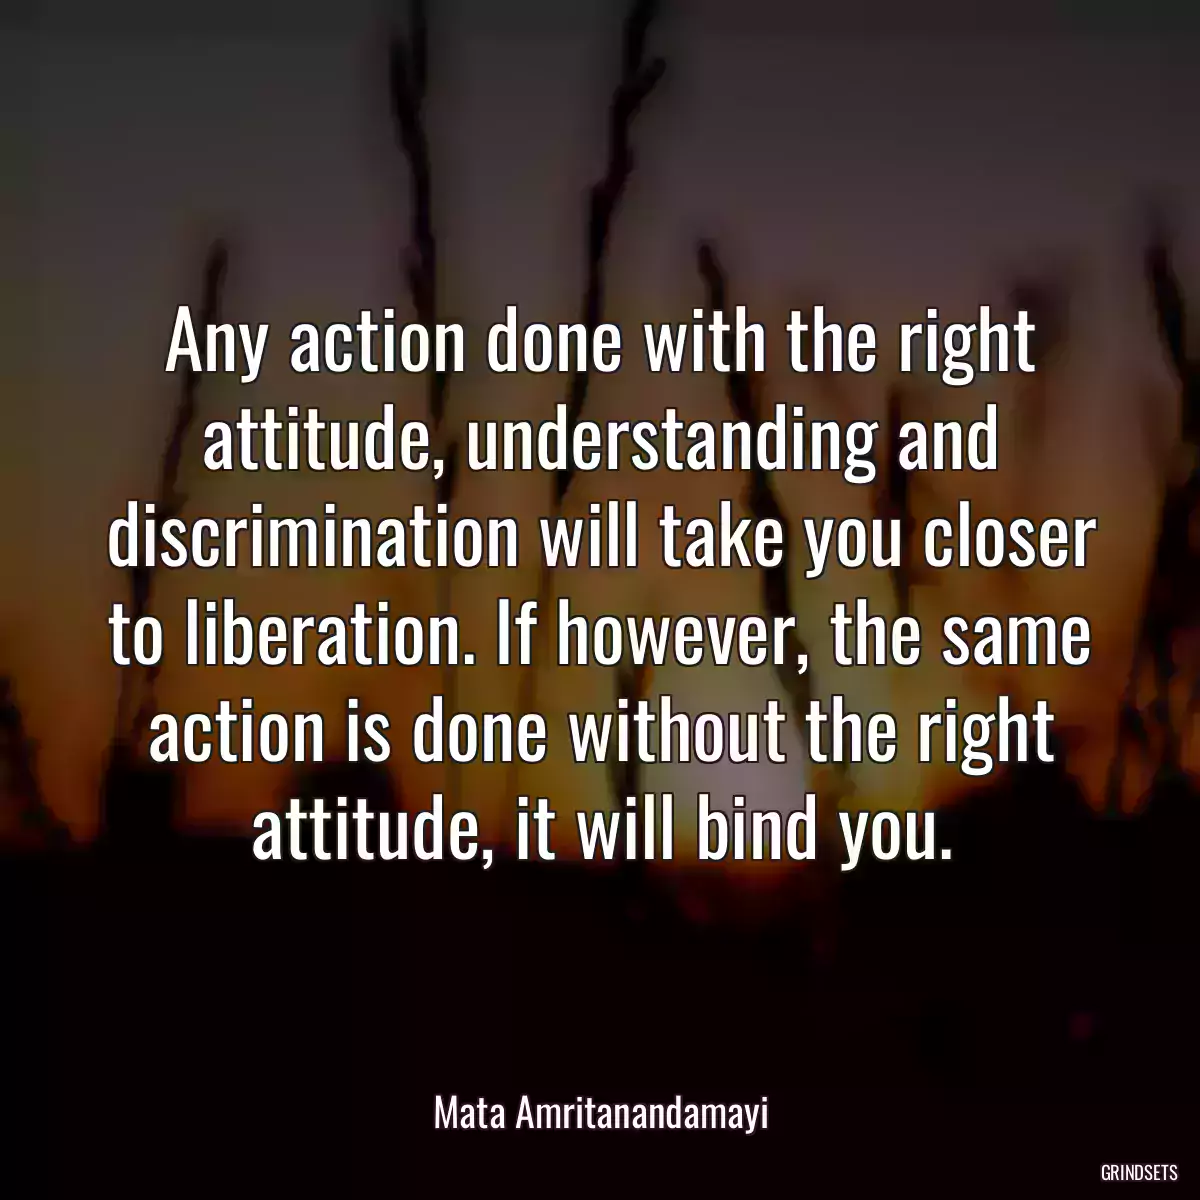 Any action done with the right attitude, understanding and discrimination will take you closer to liberation. If however, the same action is done without the right attitude, it will bind you.